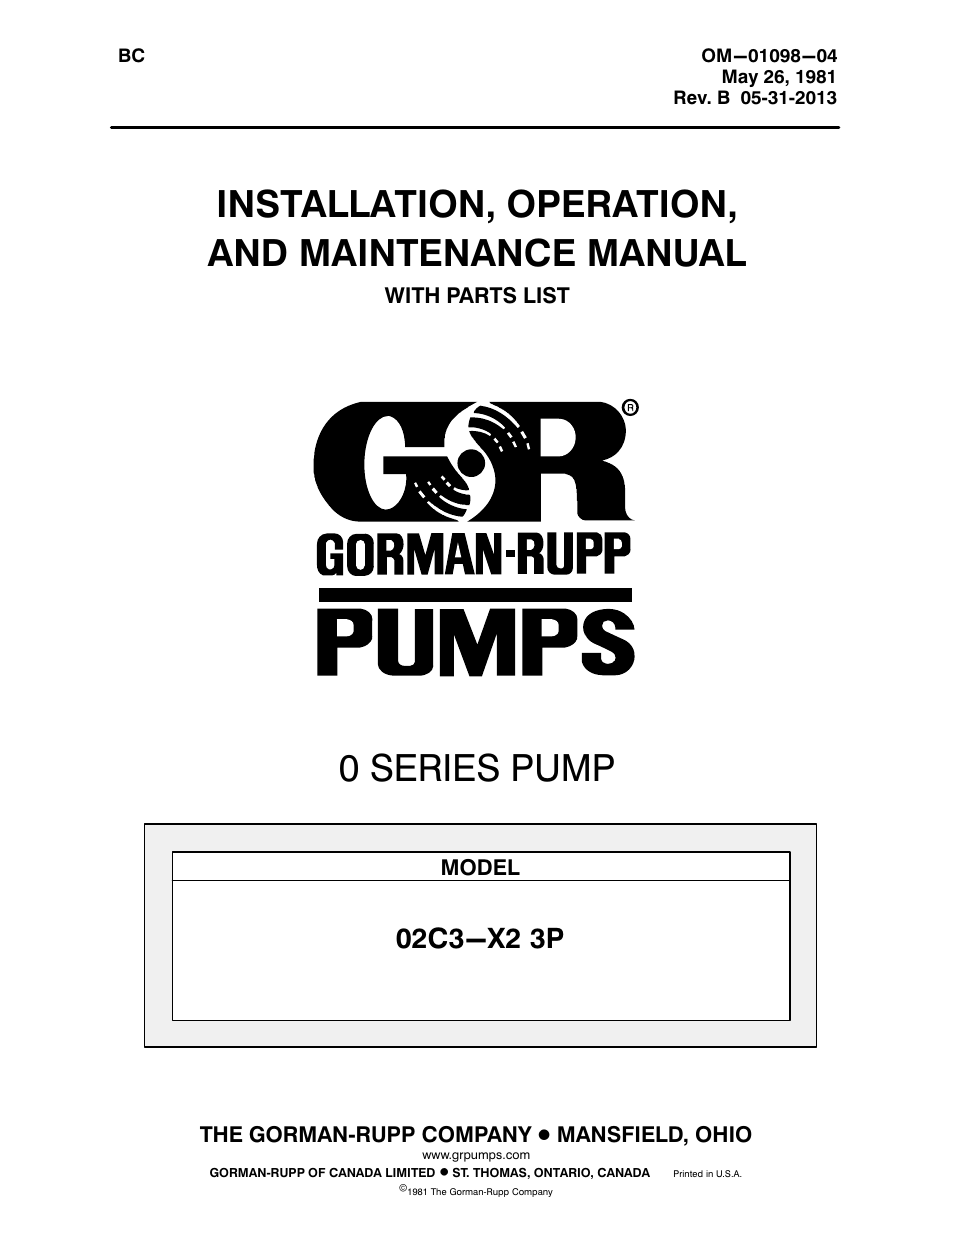 Gorman-Rupp Pumps 02C3-X2 3P 390873 and up User Manual | 26 pages